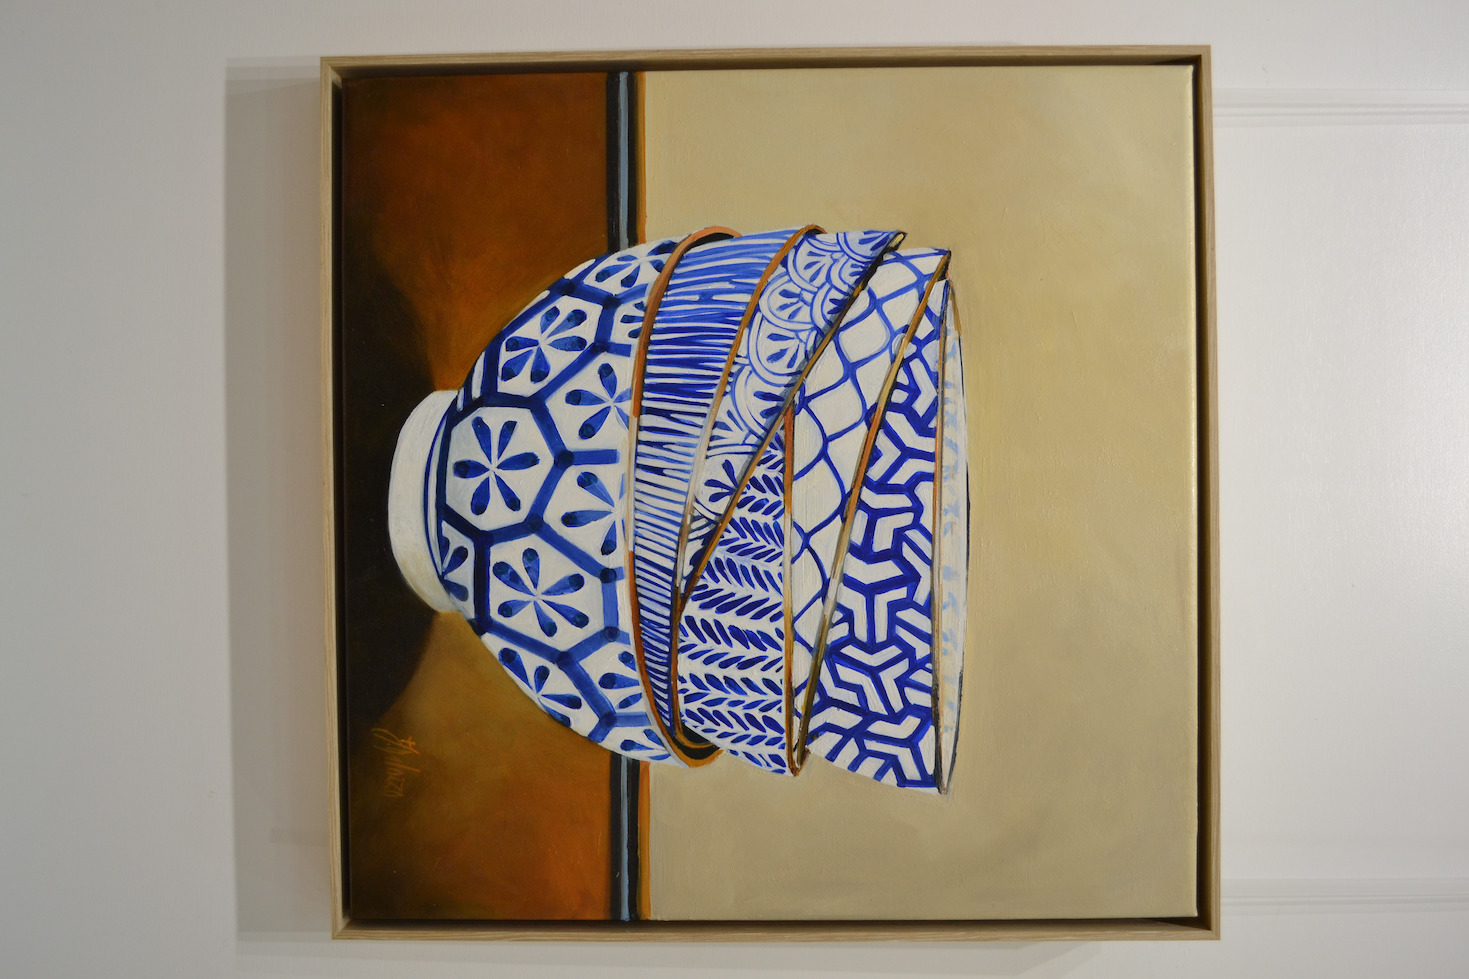 Framed Front View Of Still Life Painting "Monyou Bowls 4" By Judith Dalozzo